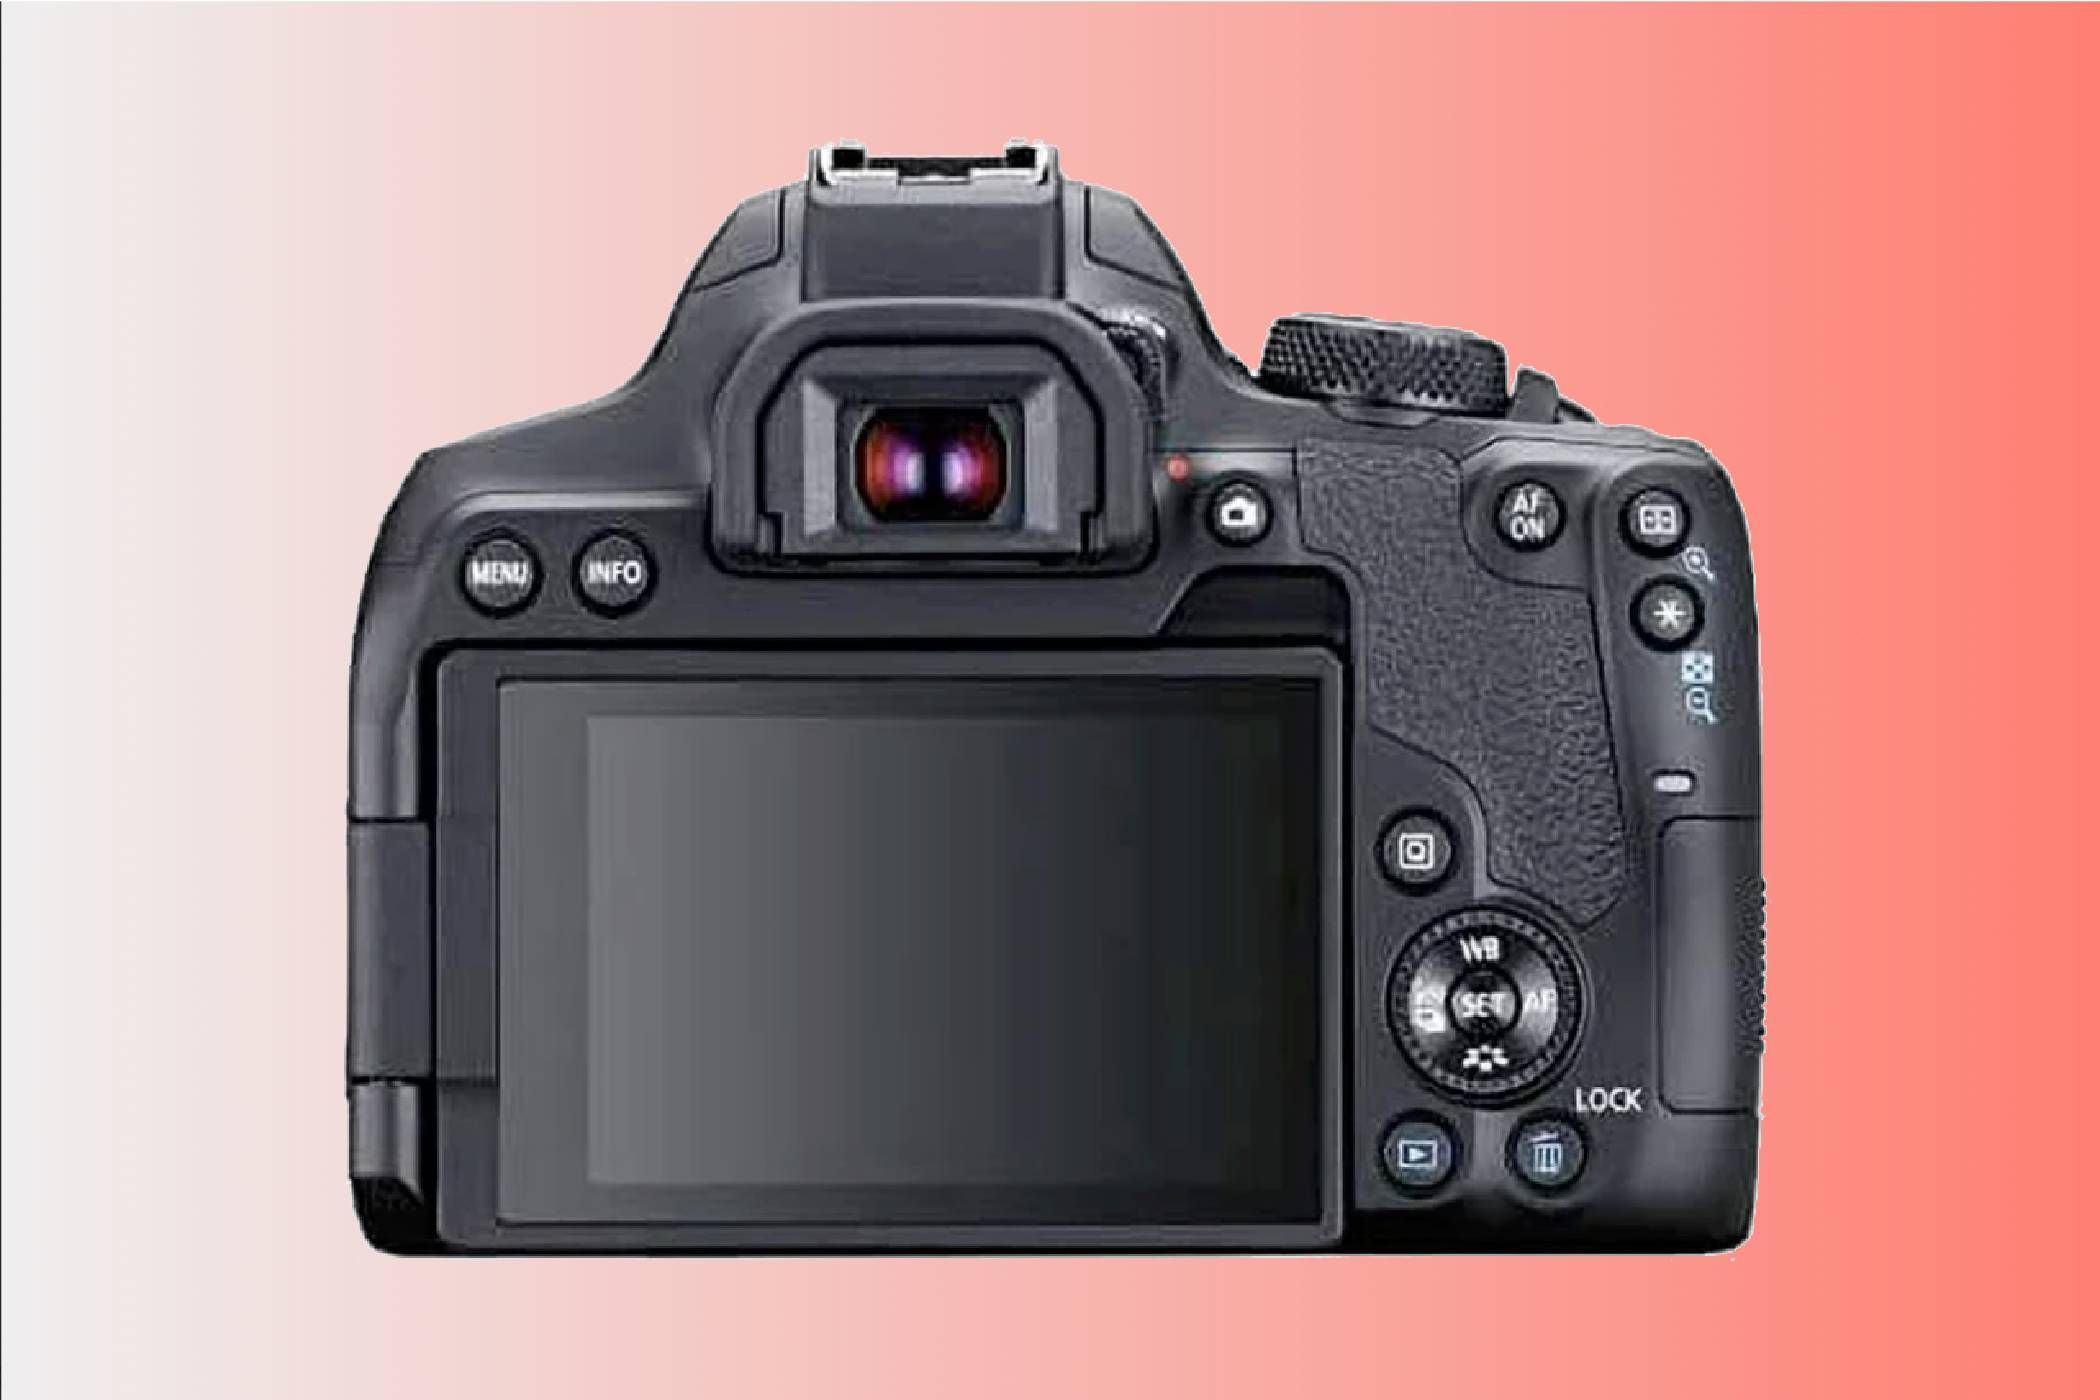 The touchscreen of the Canon EOS Rebel T8i